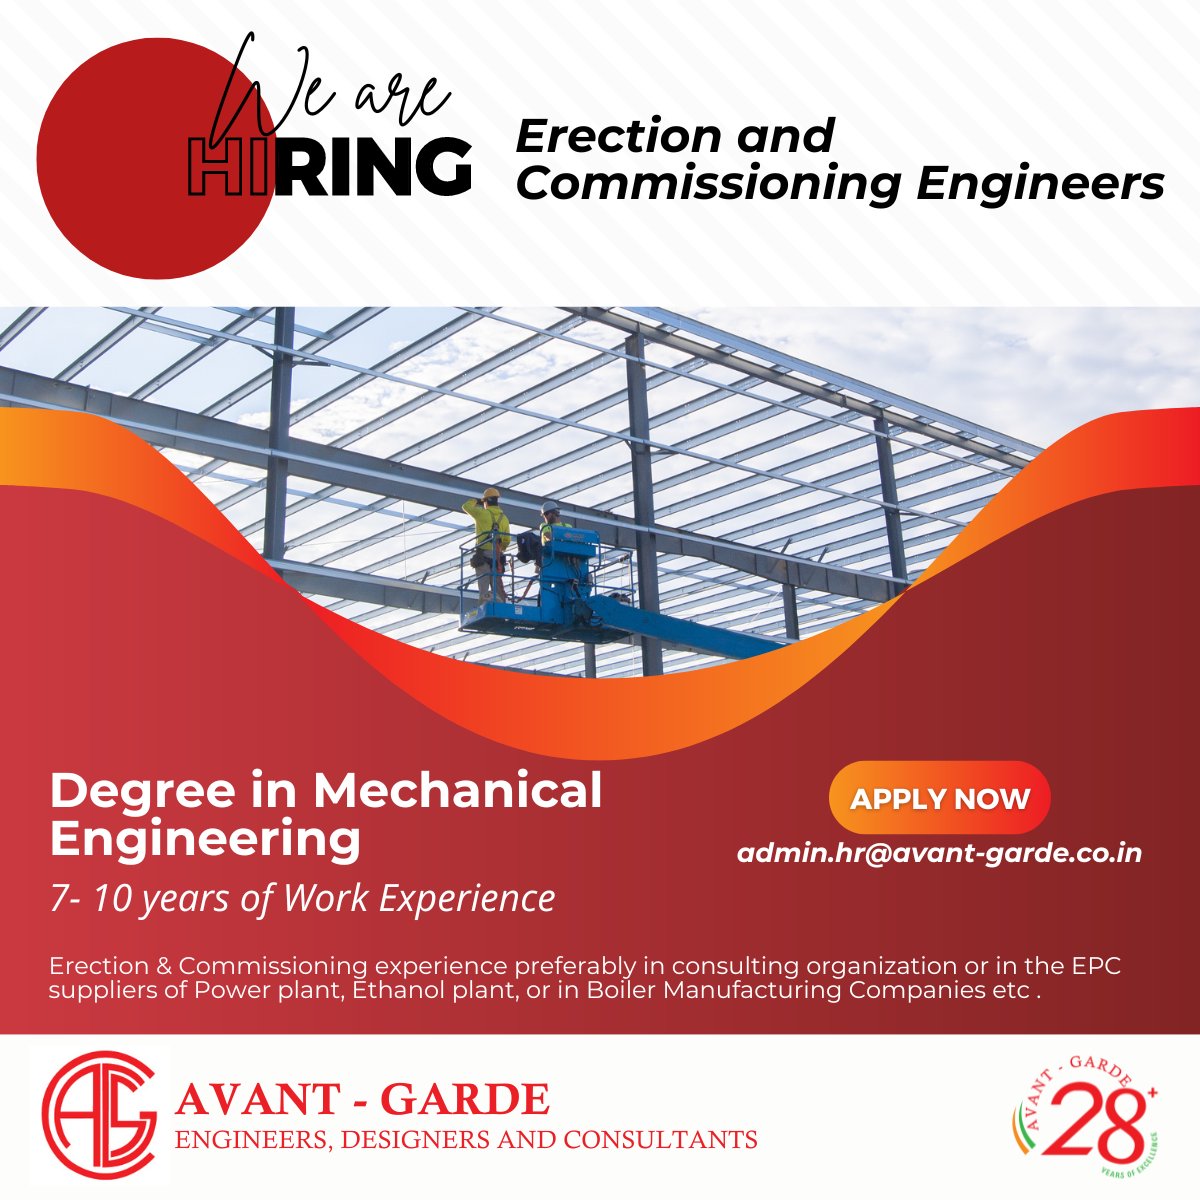 Job Alert for Erection and Commissioning Engineers!
BE in Mechanical engineering, 7-10 years experience
Apply: admin.hr@avant-garde.co.in
#erectionengineer #commissioningengineer #engineeringjobs #avantgarde #avantgardeindia #careers #nowhiring #chennaijobs #jobsinchennai #jobs